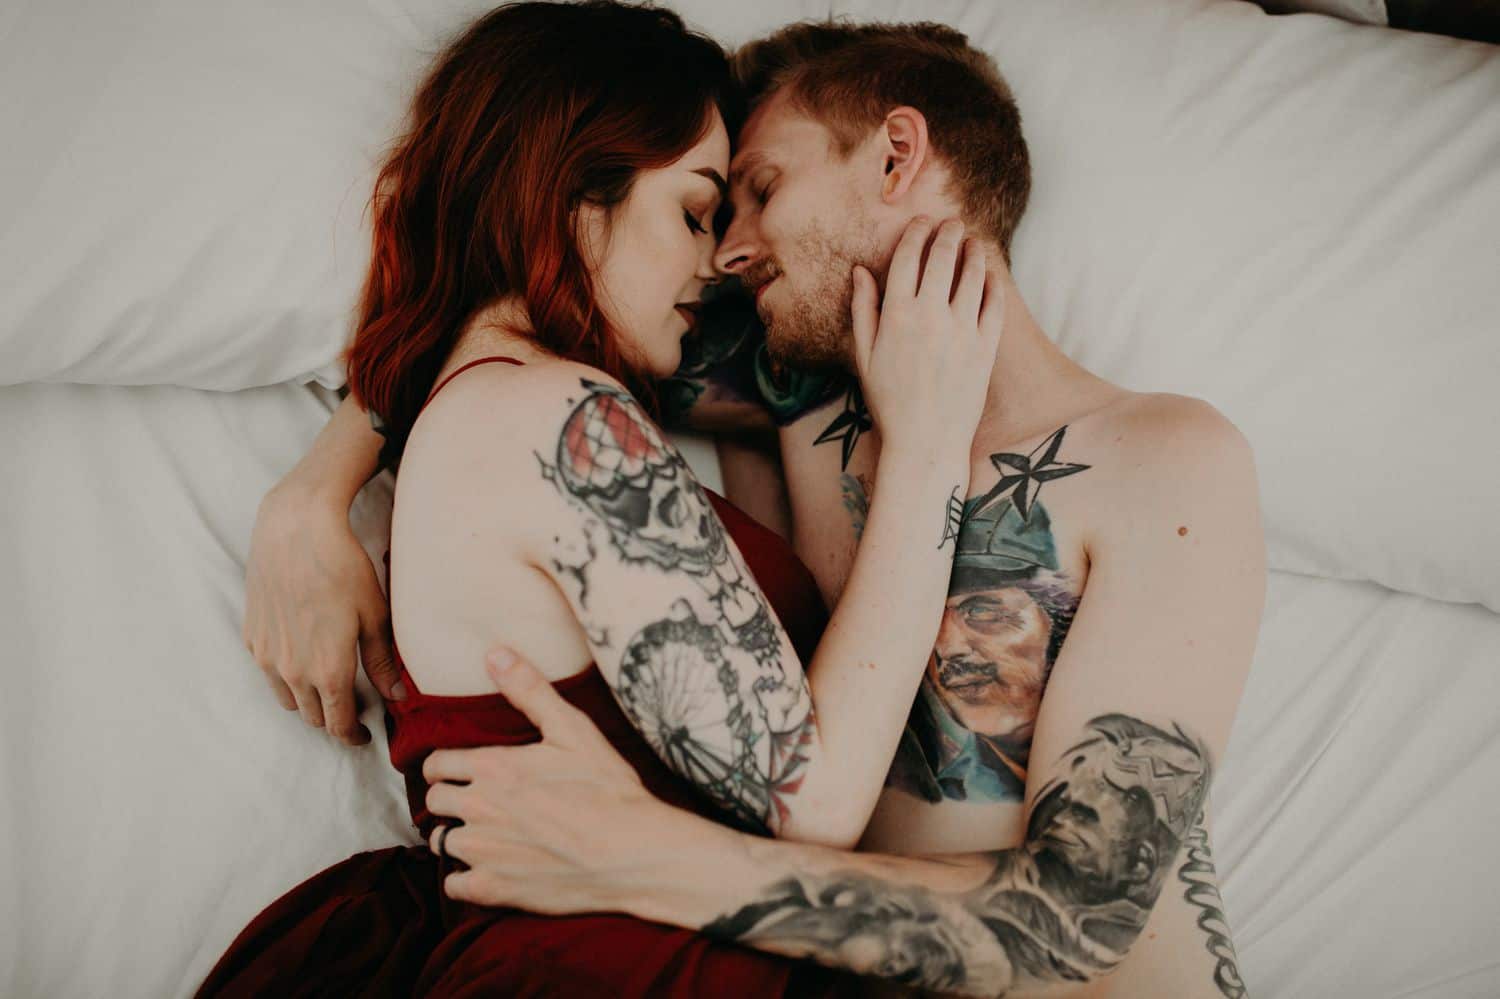 This Is the Boudoir Photography Shy Couples Need To See: Tattooed Couple Snuggles On Bed